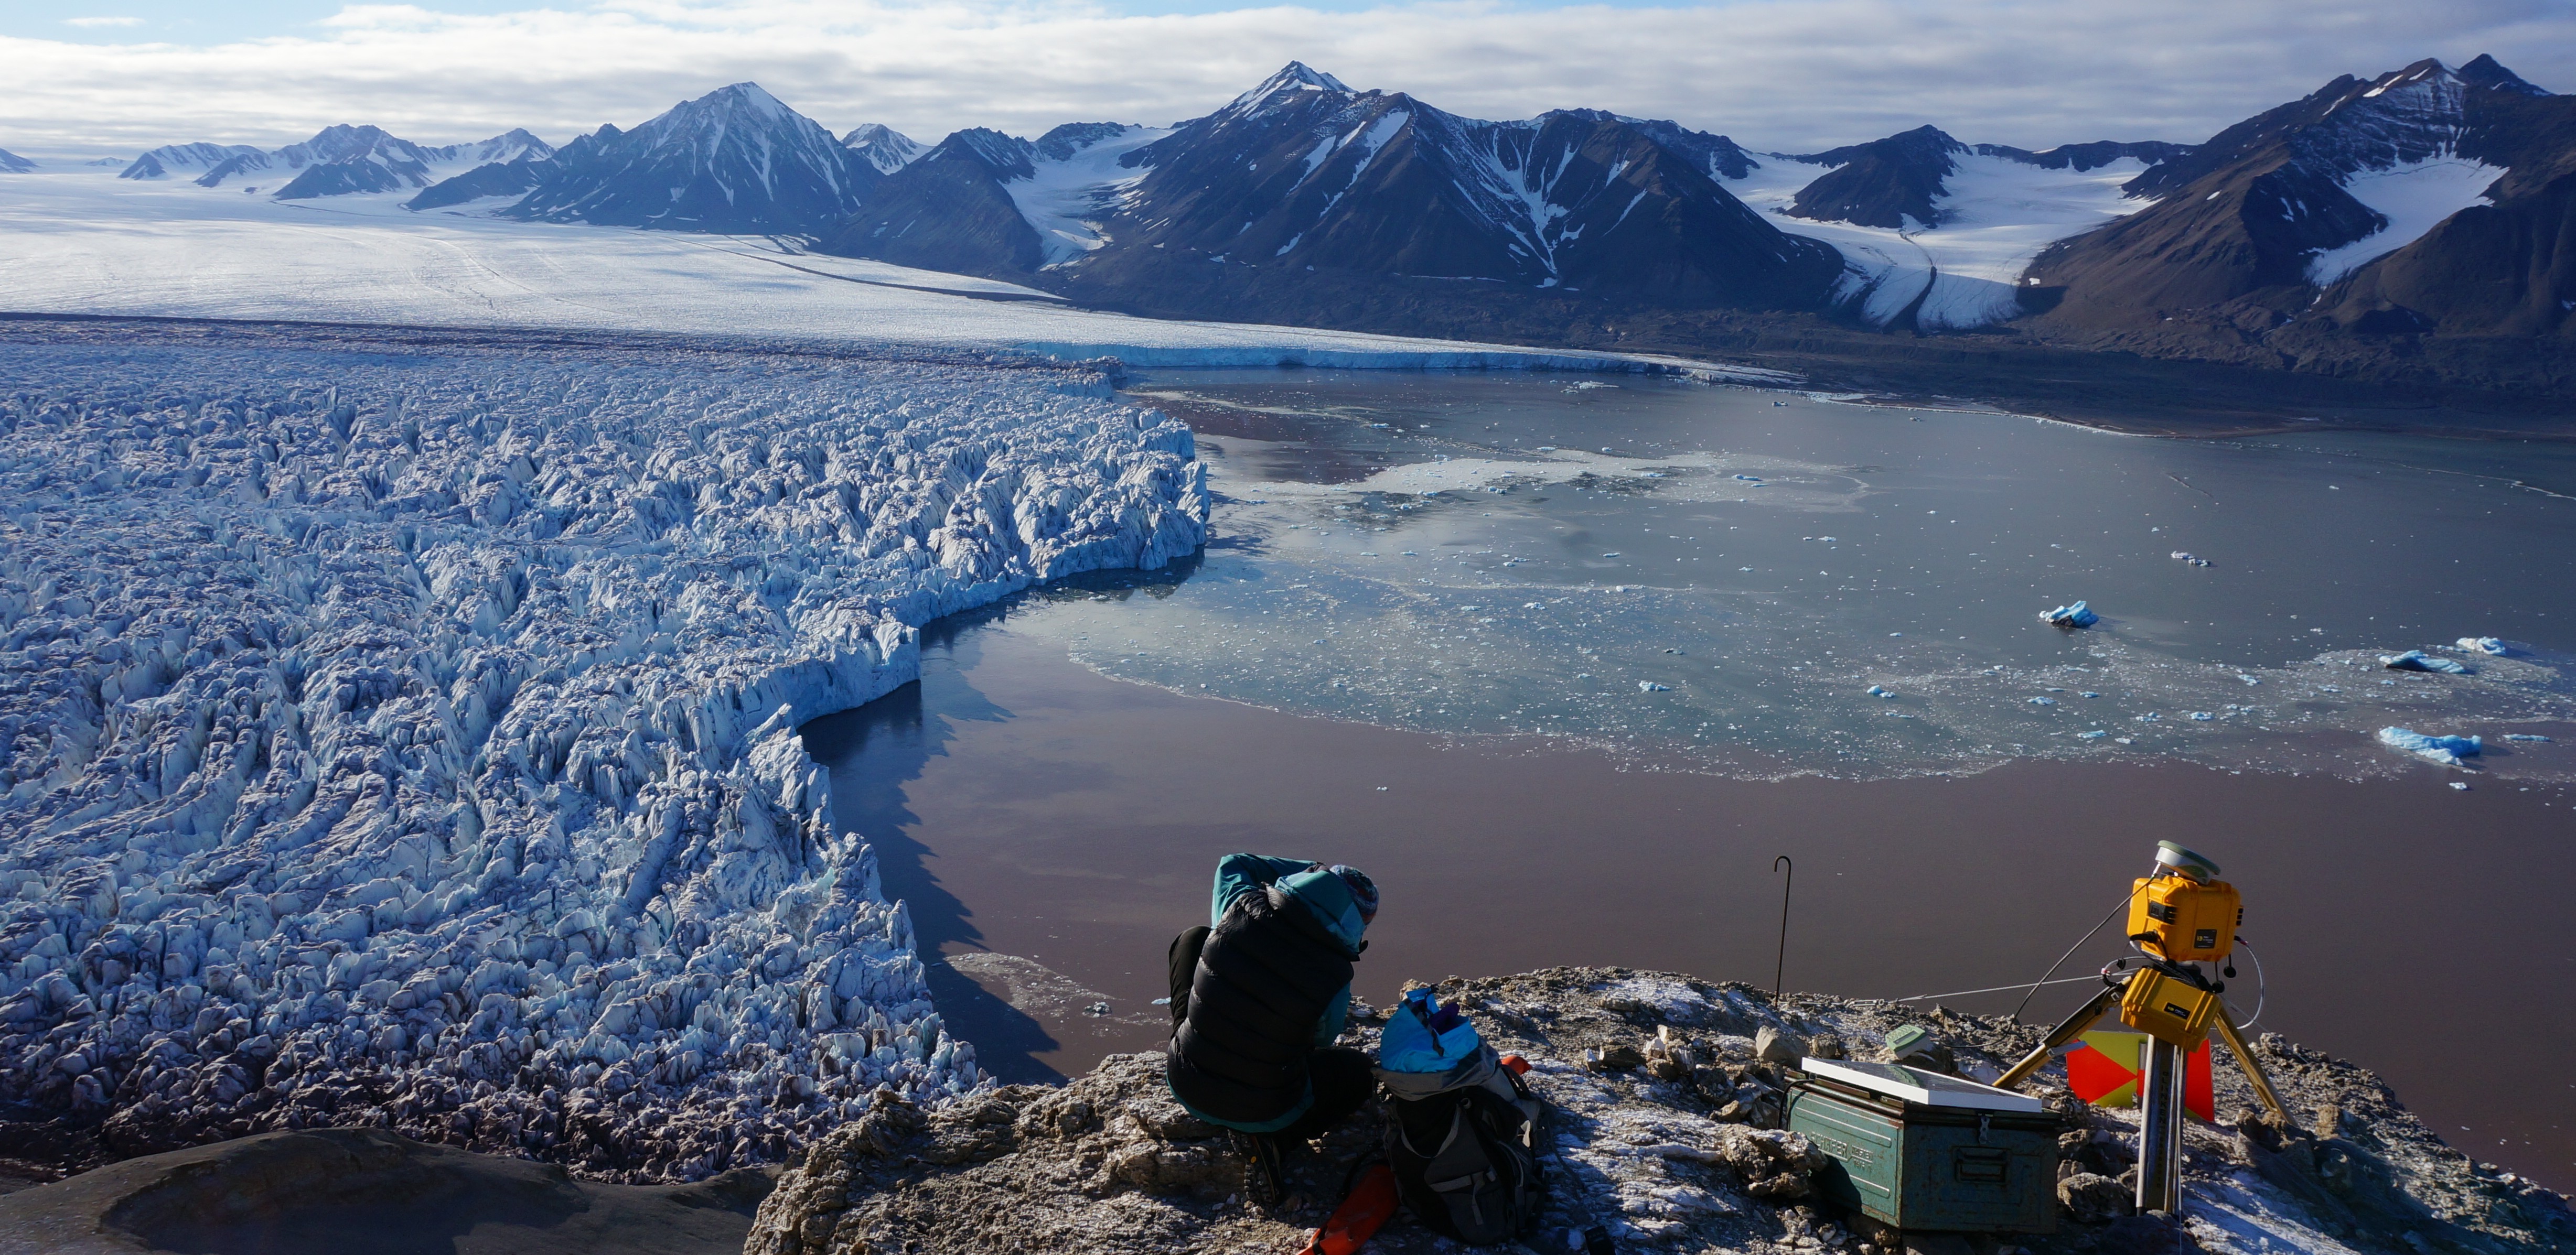 Post-doc researcher Sarah Thompson (UNIS) taking a GPS reading at camera site 2, positioned at the calving front of Kronebreen glacier, Svalbard (September 2015)